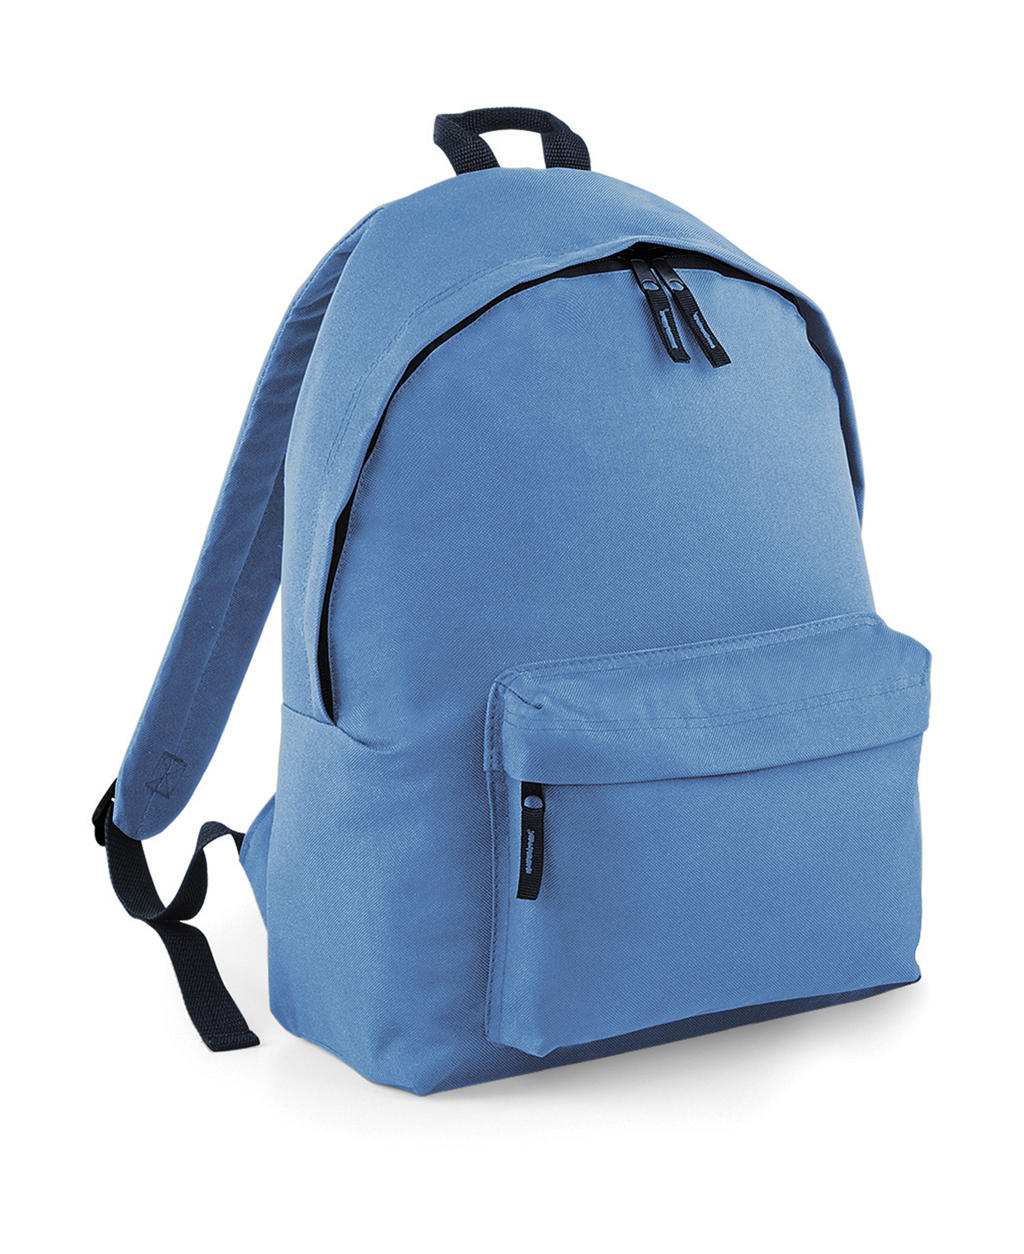  Original Fashion Backpack in Farbe Sky Blue/French Navy